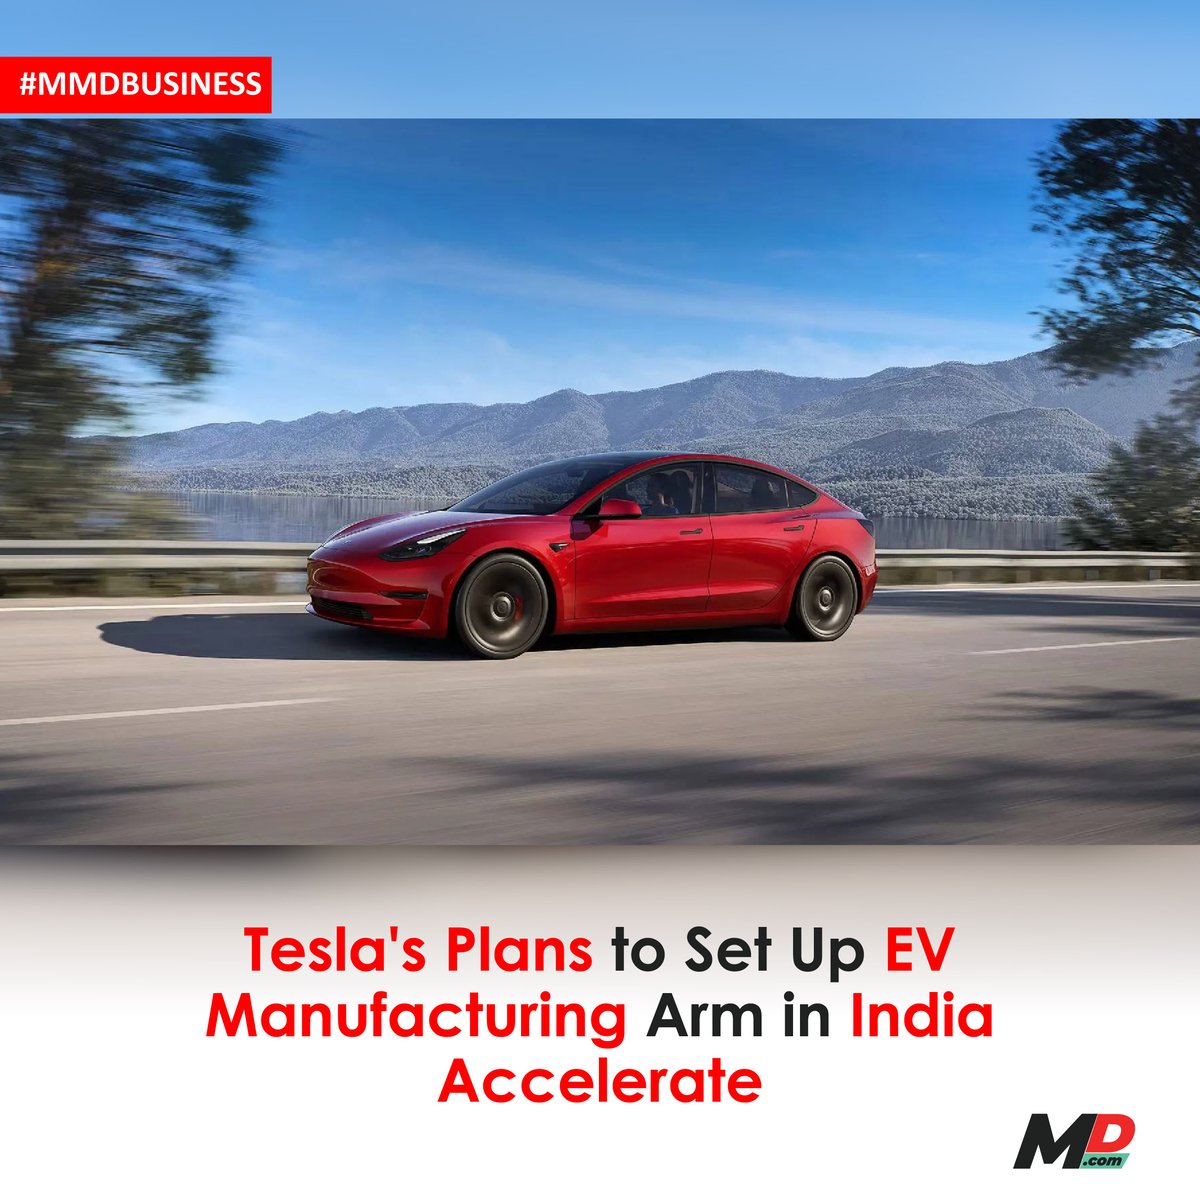 India, the world's second-most populous country, is now on the radar of electric vehicle (EV) giant @Tesla. After years of speculation and anticipation, Tesla is finally making its move into the Indian market. The company is in talks with @RIL_Updates (RIL), one of India's…